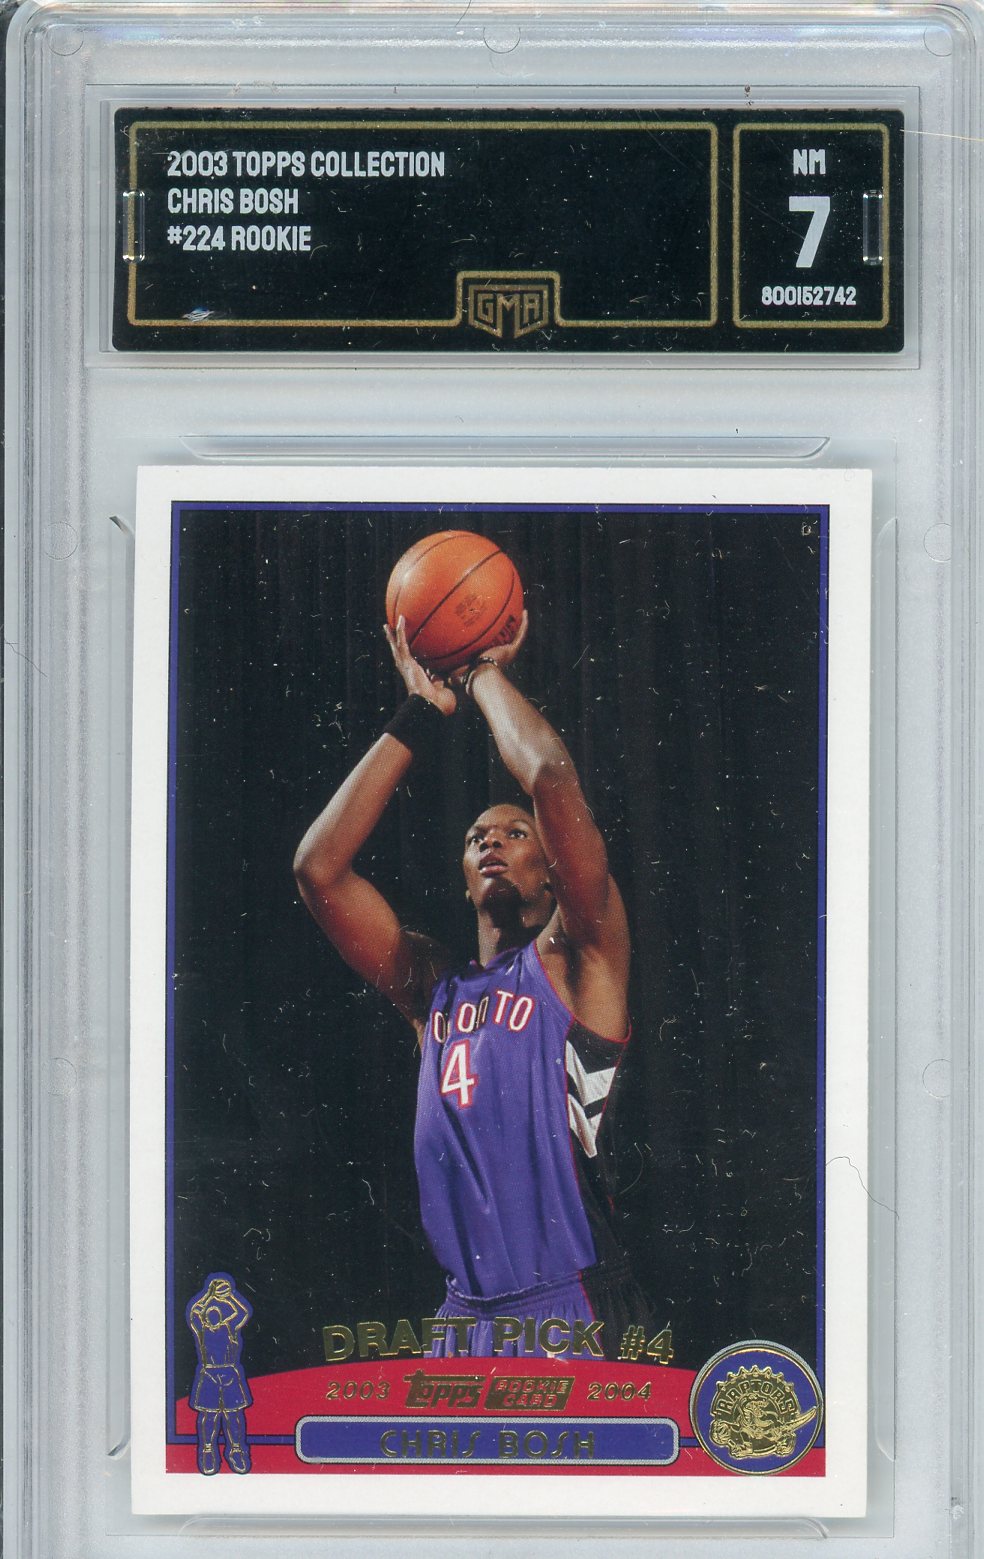 2003 Topps Collection Chris Bosh #224 Rookie Card GMA 7